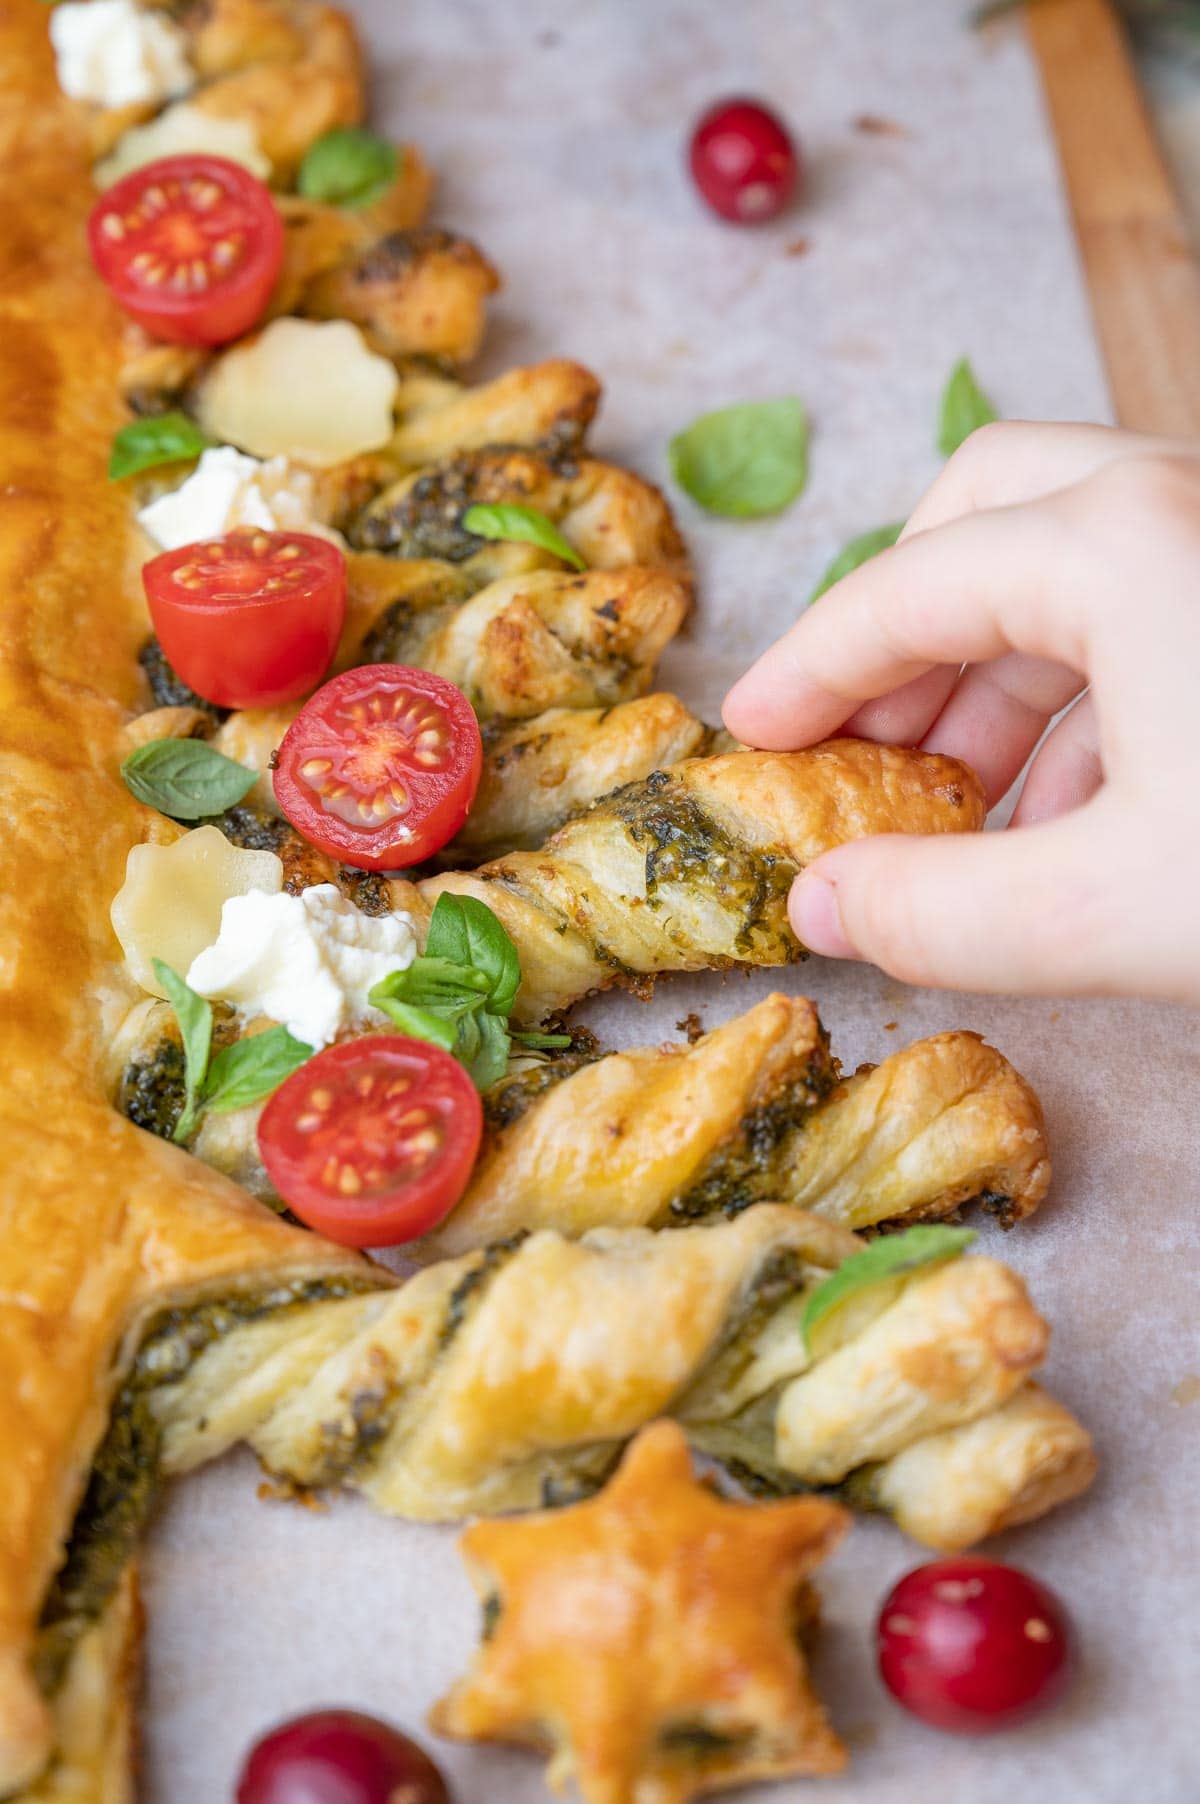 A child's hand is grabbing a piece of puff pastry Christmas tree.